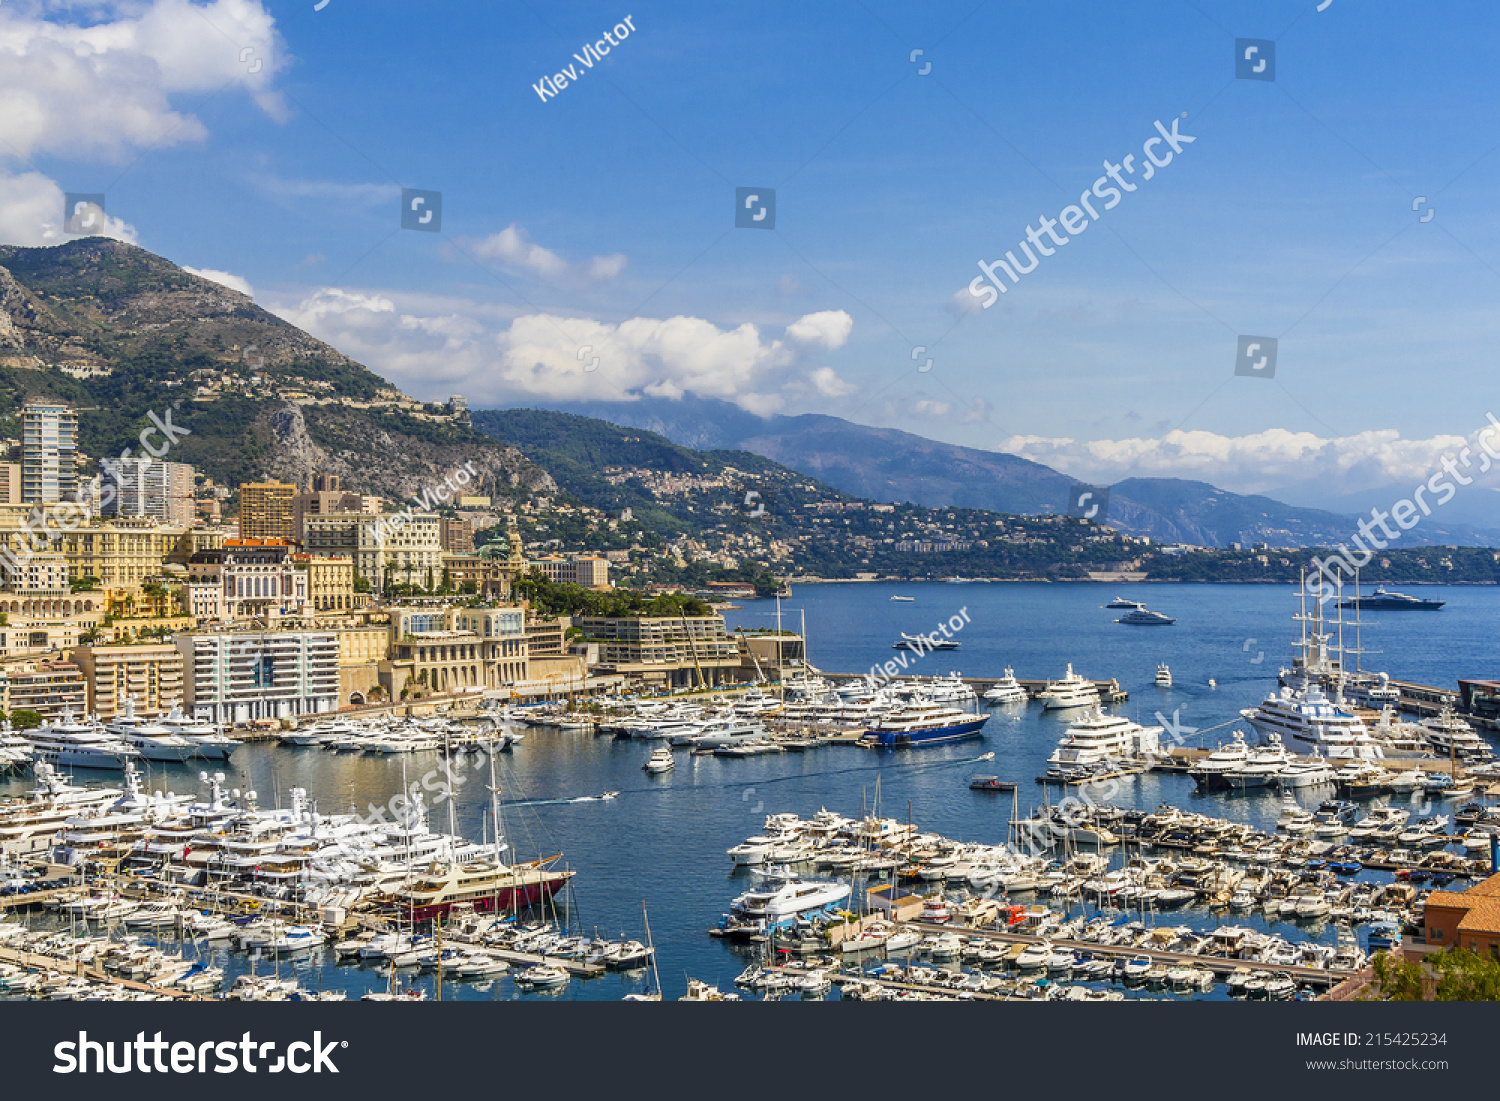 Panoramic view on marina and excellent residential buildings in Monte Carlo, Monaco. Principality of Monaco is a sovereign city state, located on the French Riviera in Western Europe. #215425234